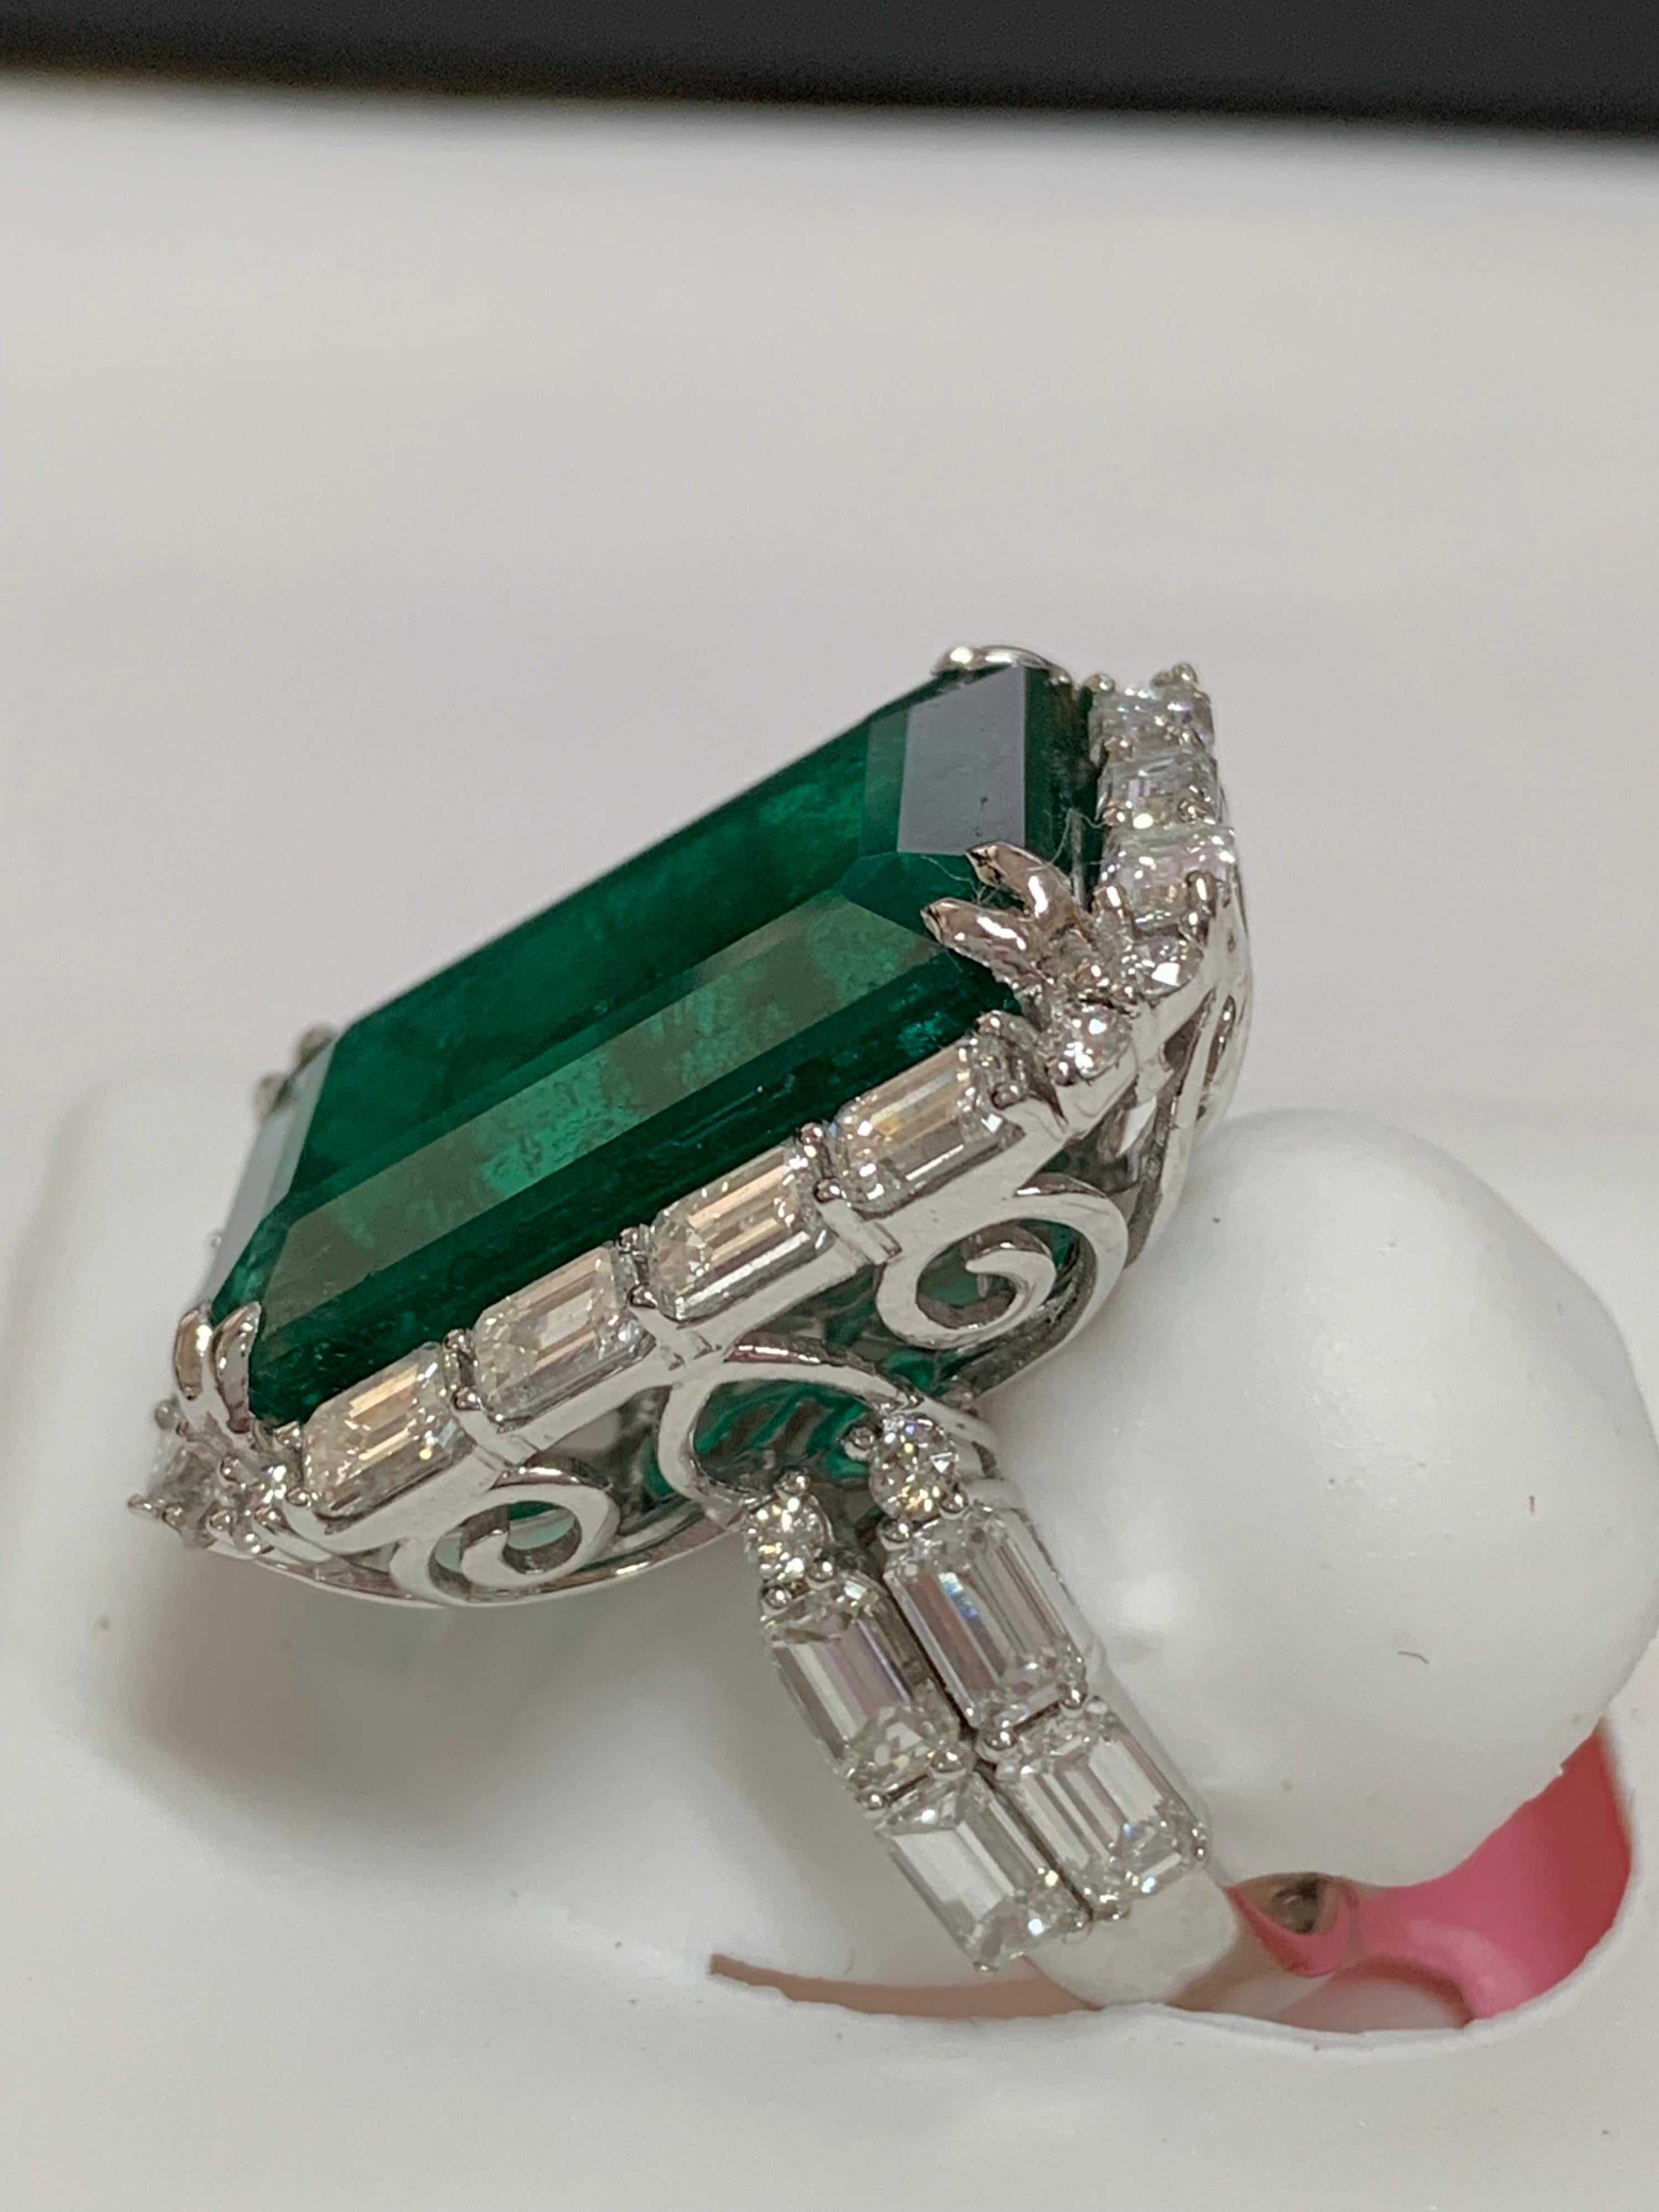 Contemporary IGLCertified 23.98 Carat Emerald and a Diamond Ring